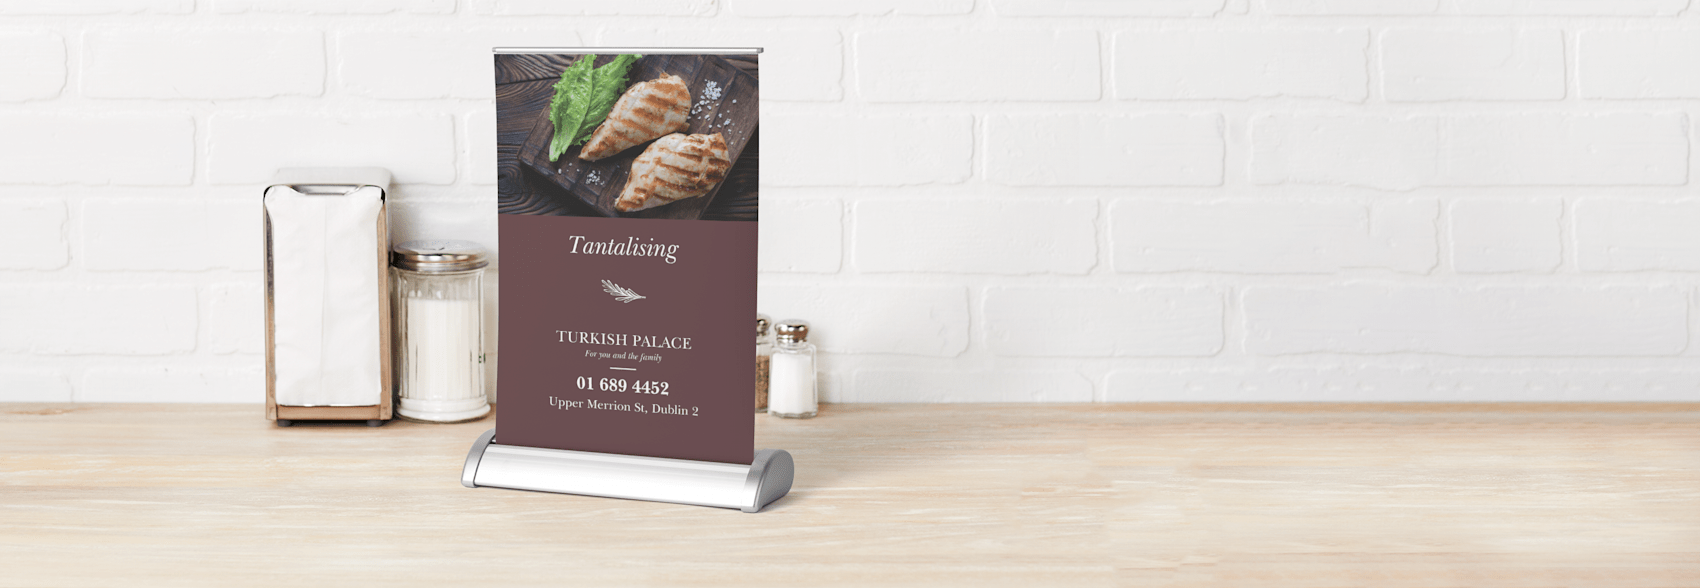 Tabletop Roller Banners 2